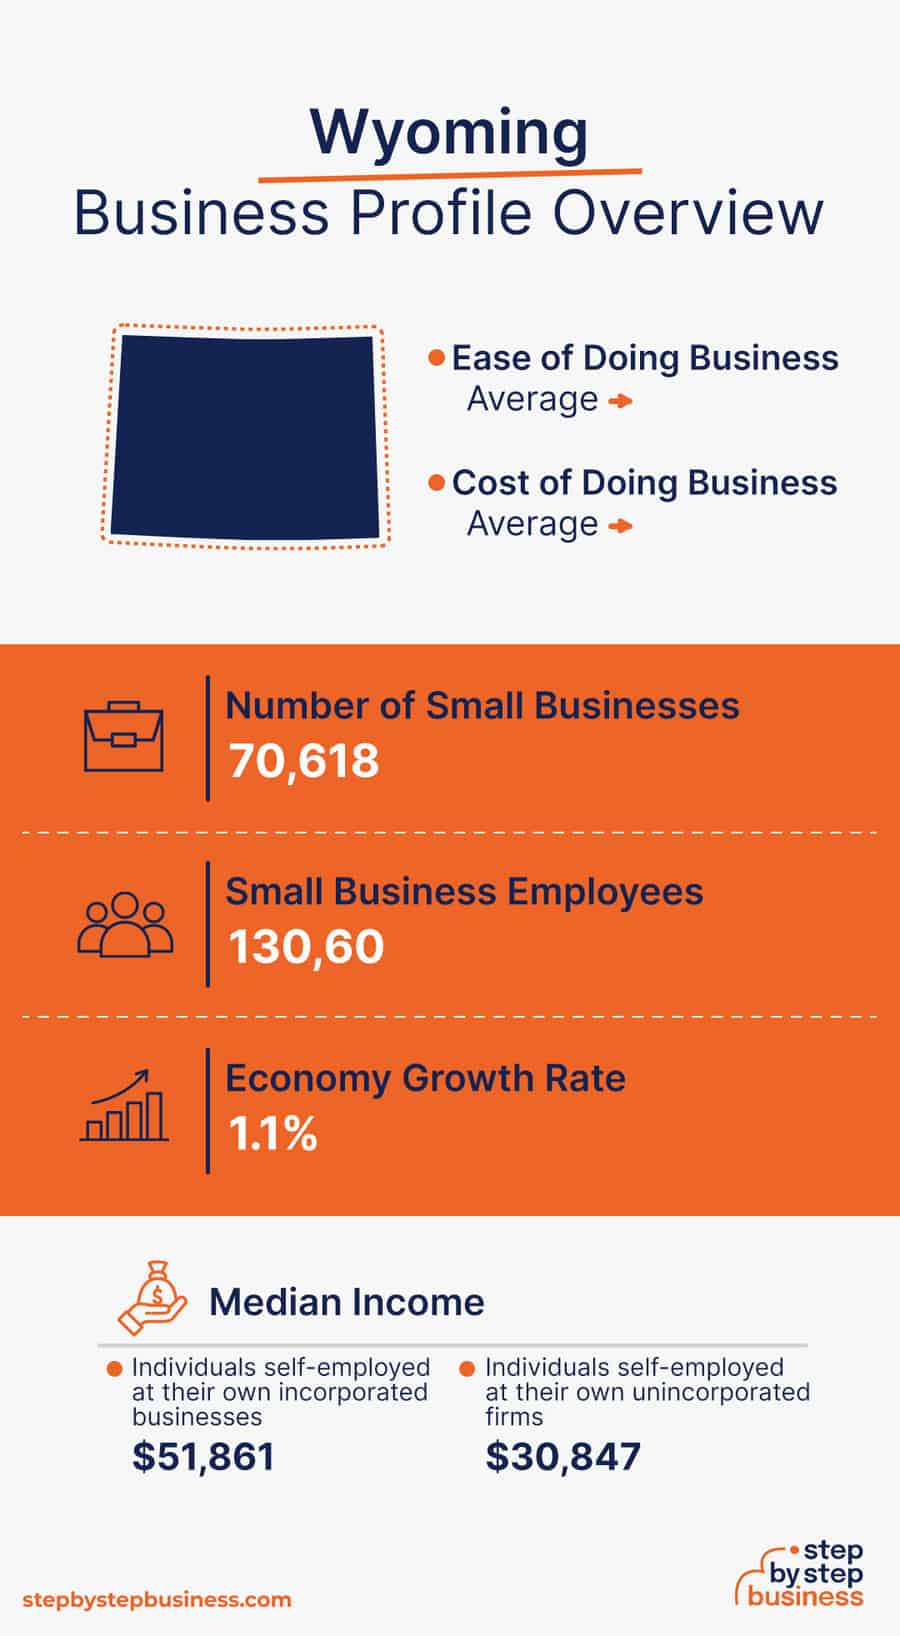 Wyoming Business Profile Overview